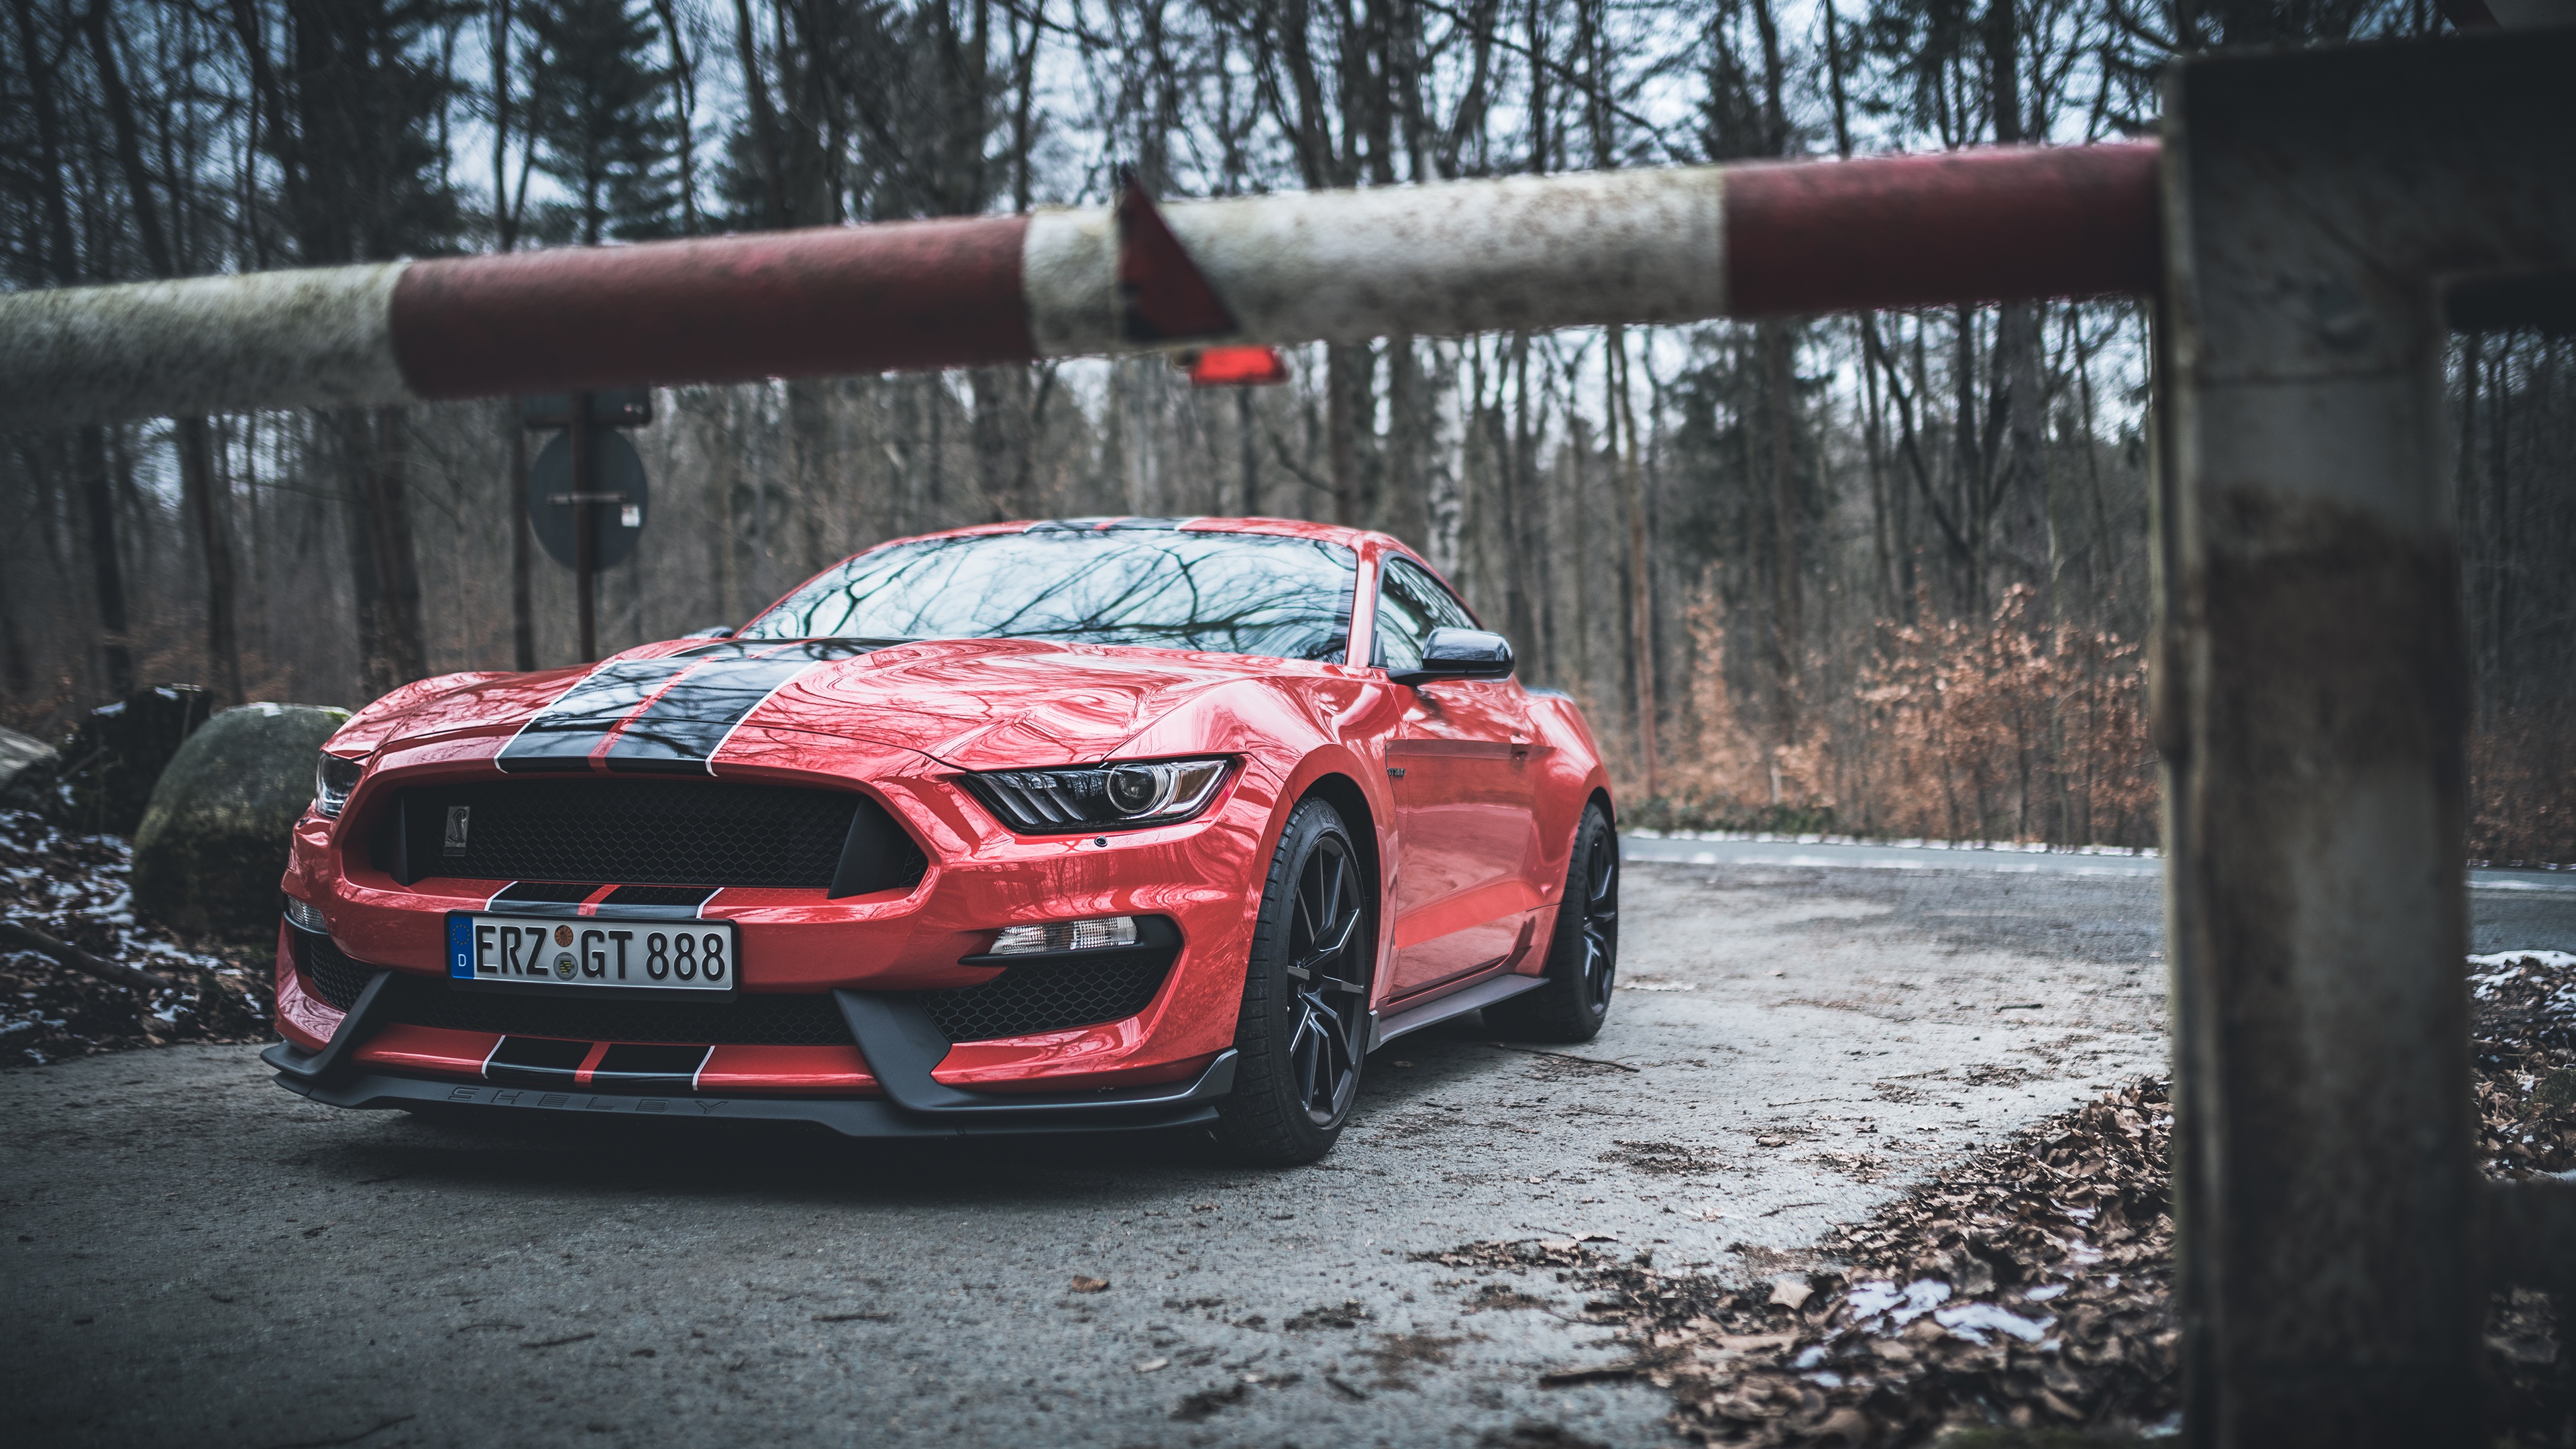 Ford Mustang Shelby Ford Mustang Ford Car Red Car Muscle Car 3840x2160